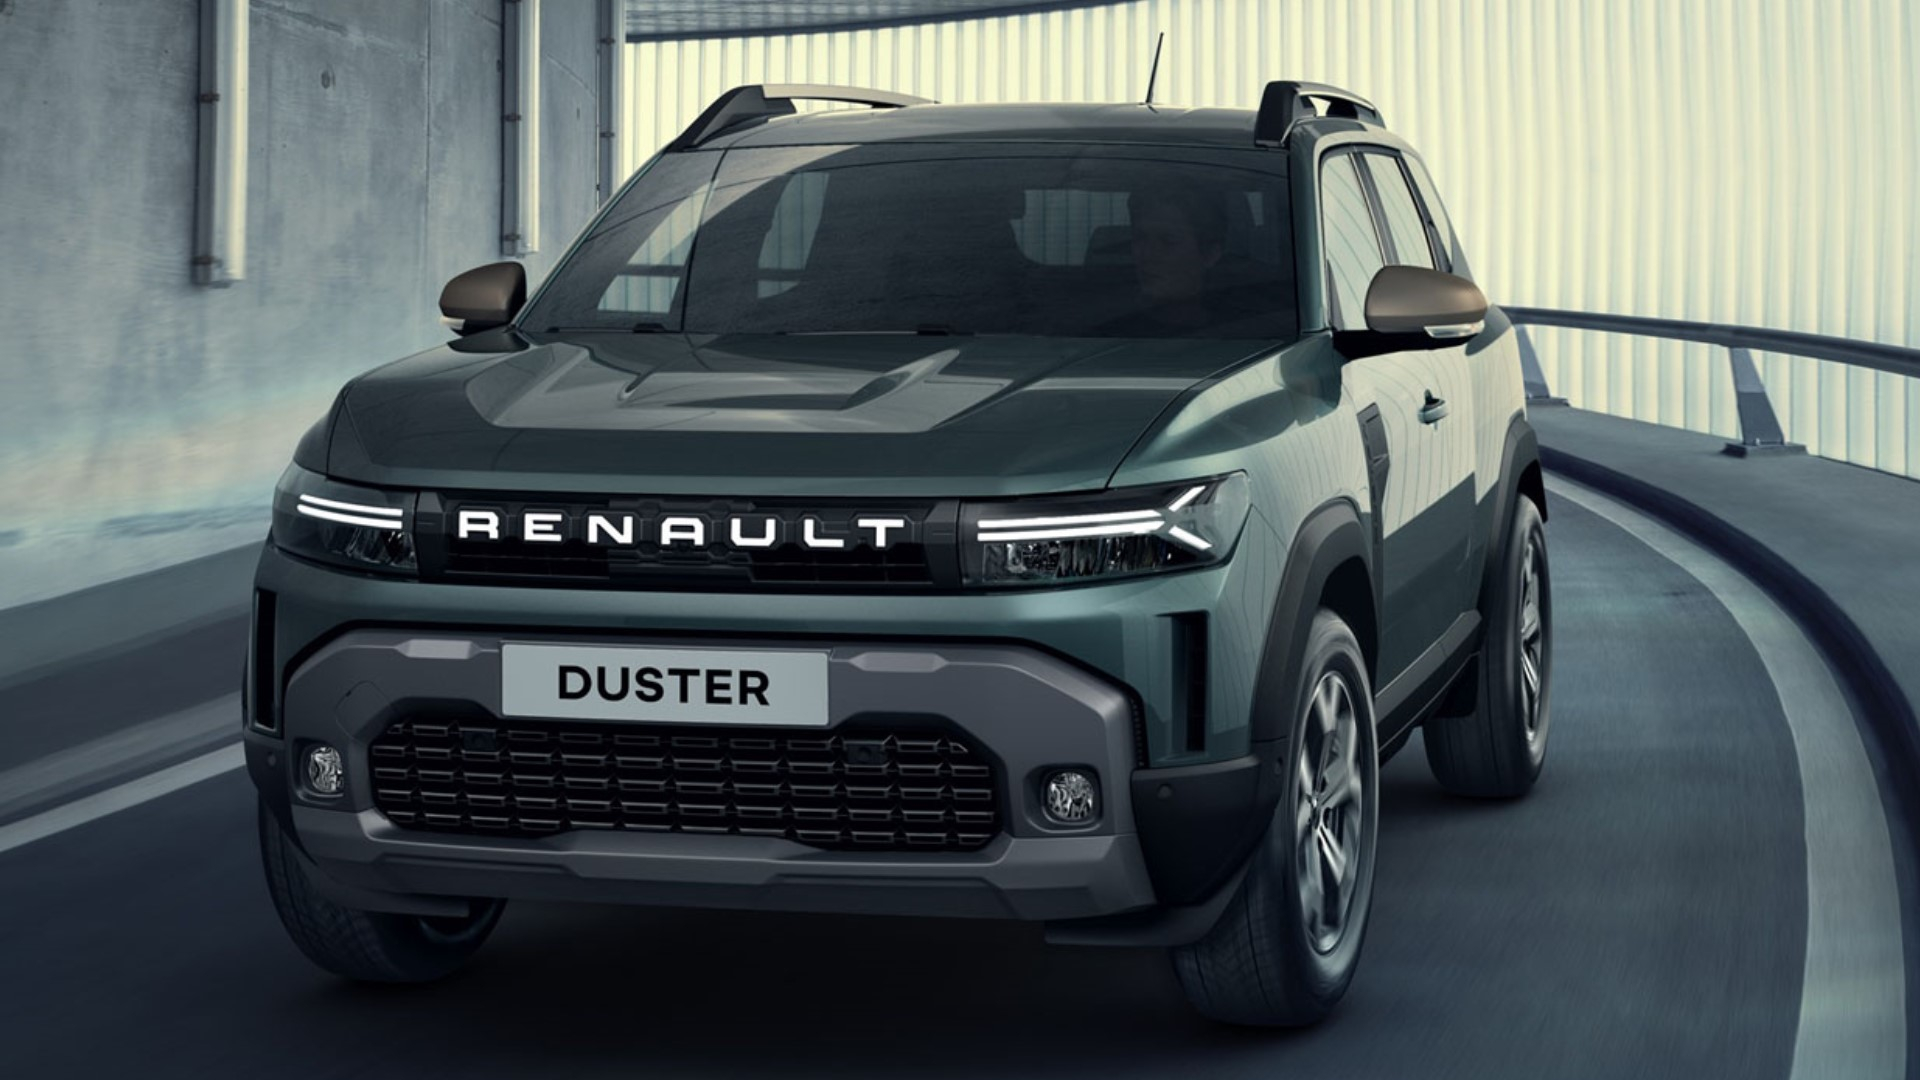 Dacia Duster is Gone Renault Duster is Here